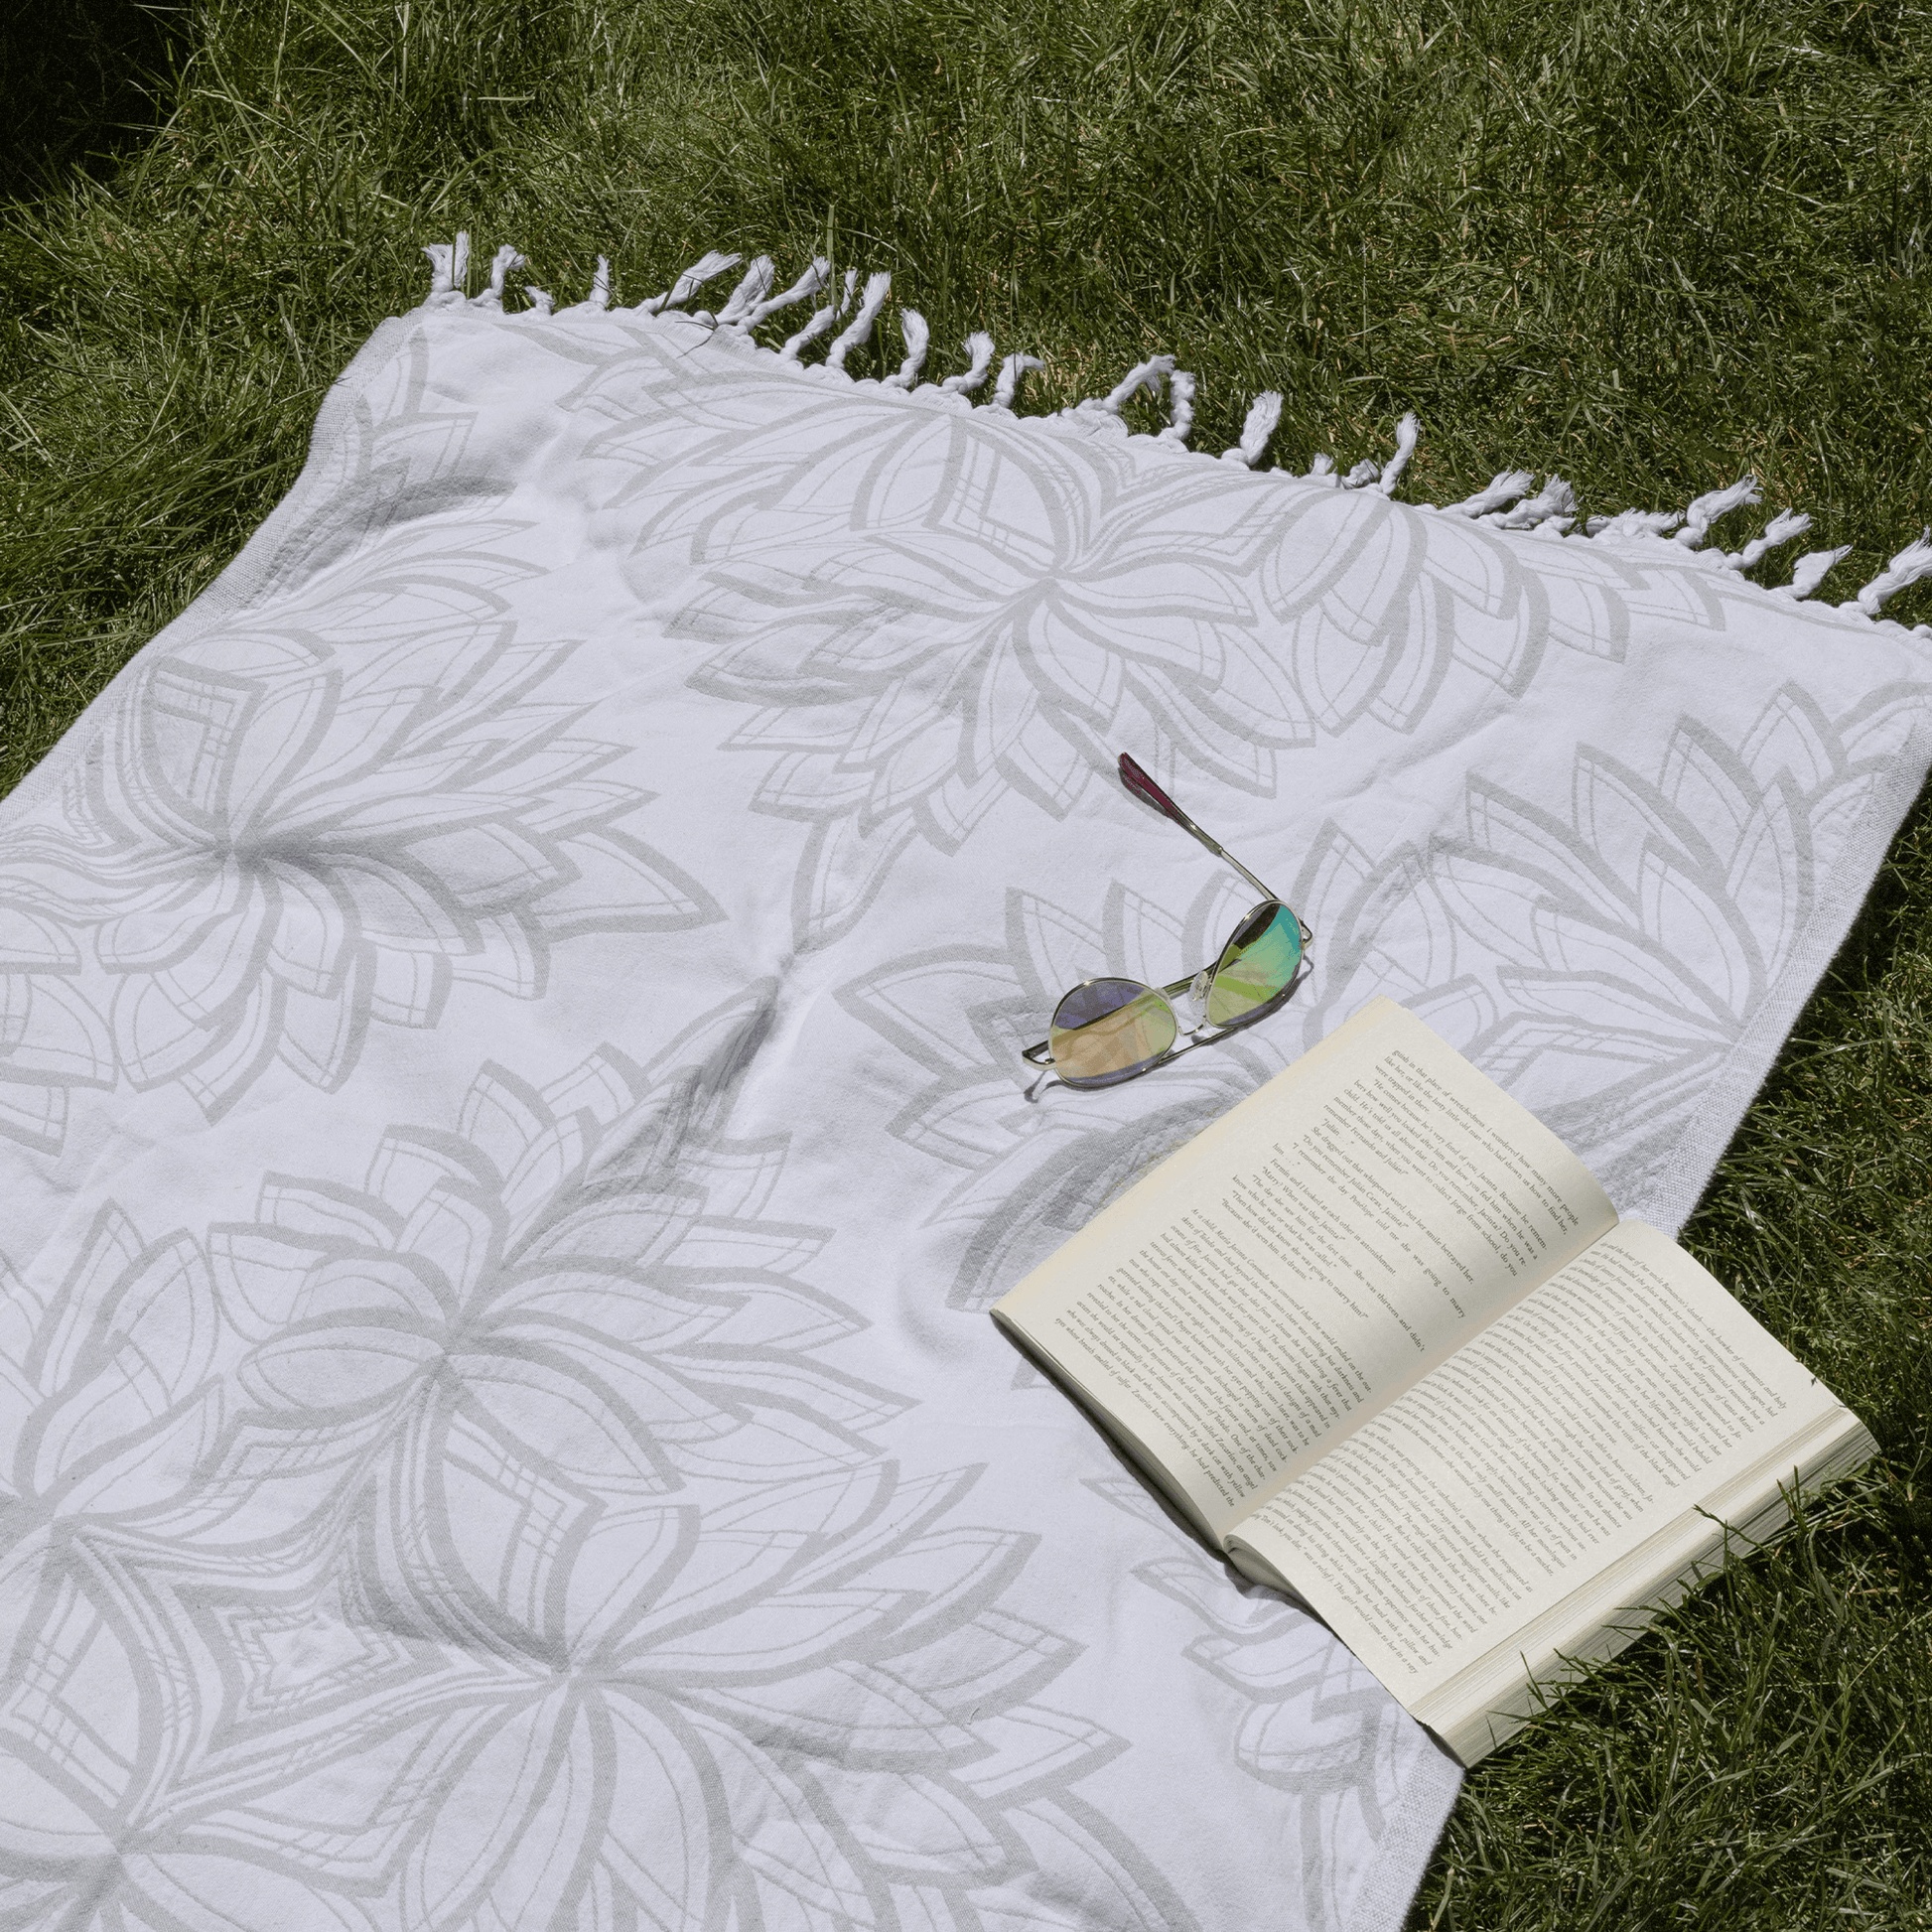 Grey and white Turkish towel on the grass with a book and sun glasses in the summer sun